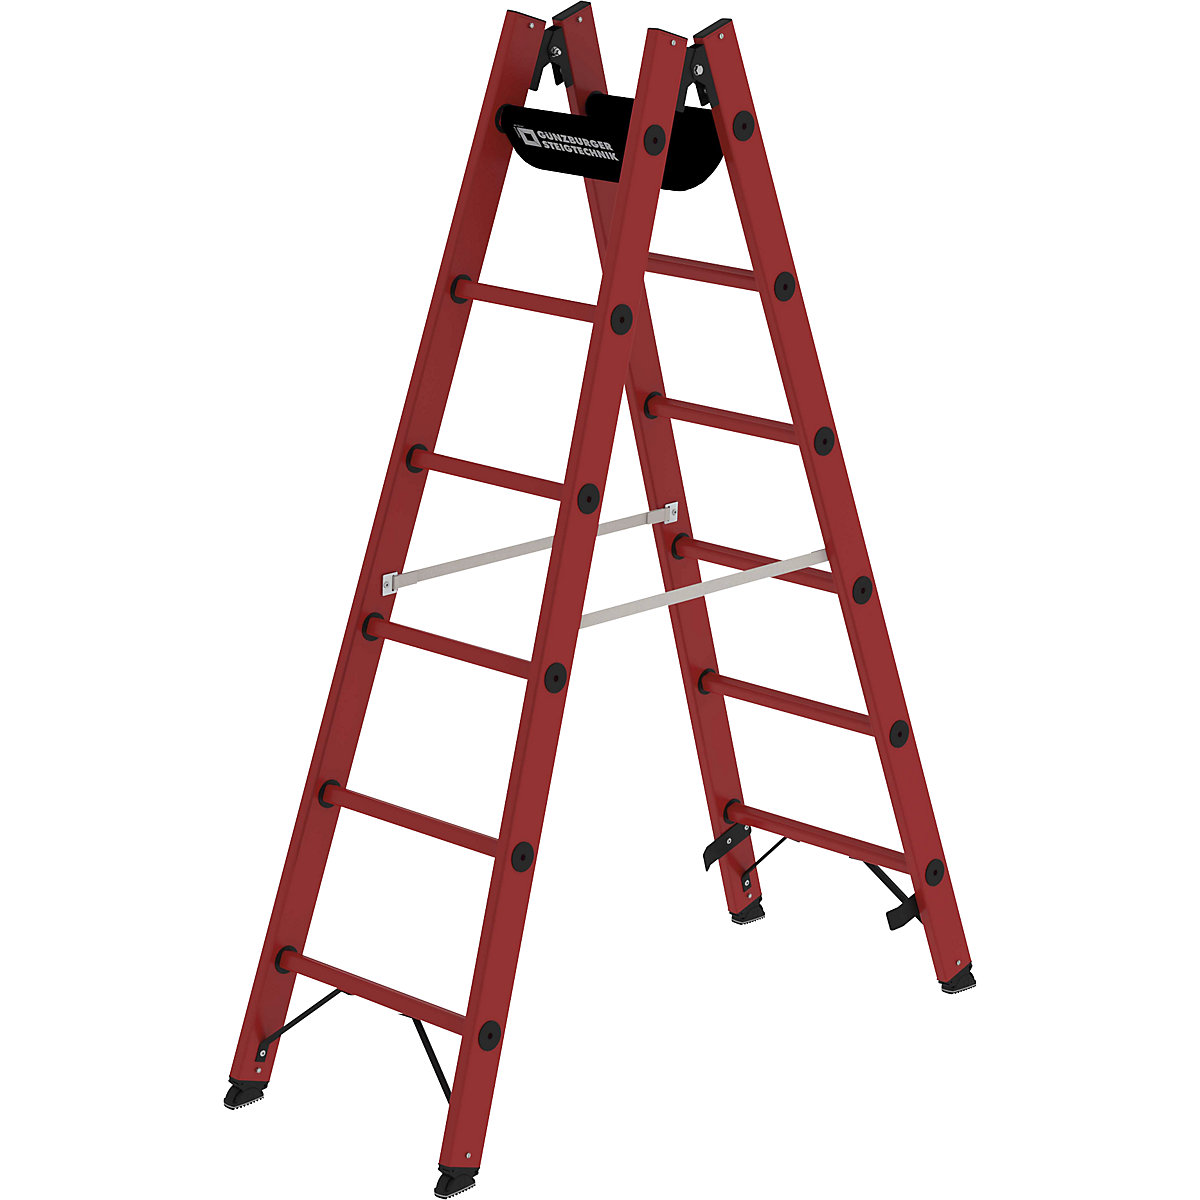 Solid plastic ladder – MUNK, made entirely of GRP, 2 x 6 rungs-4